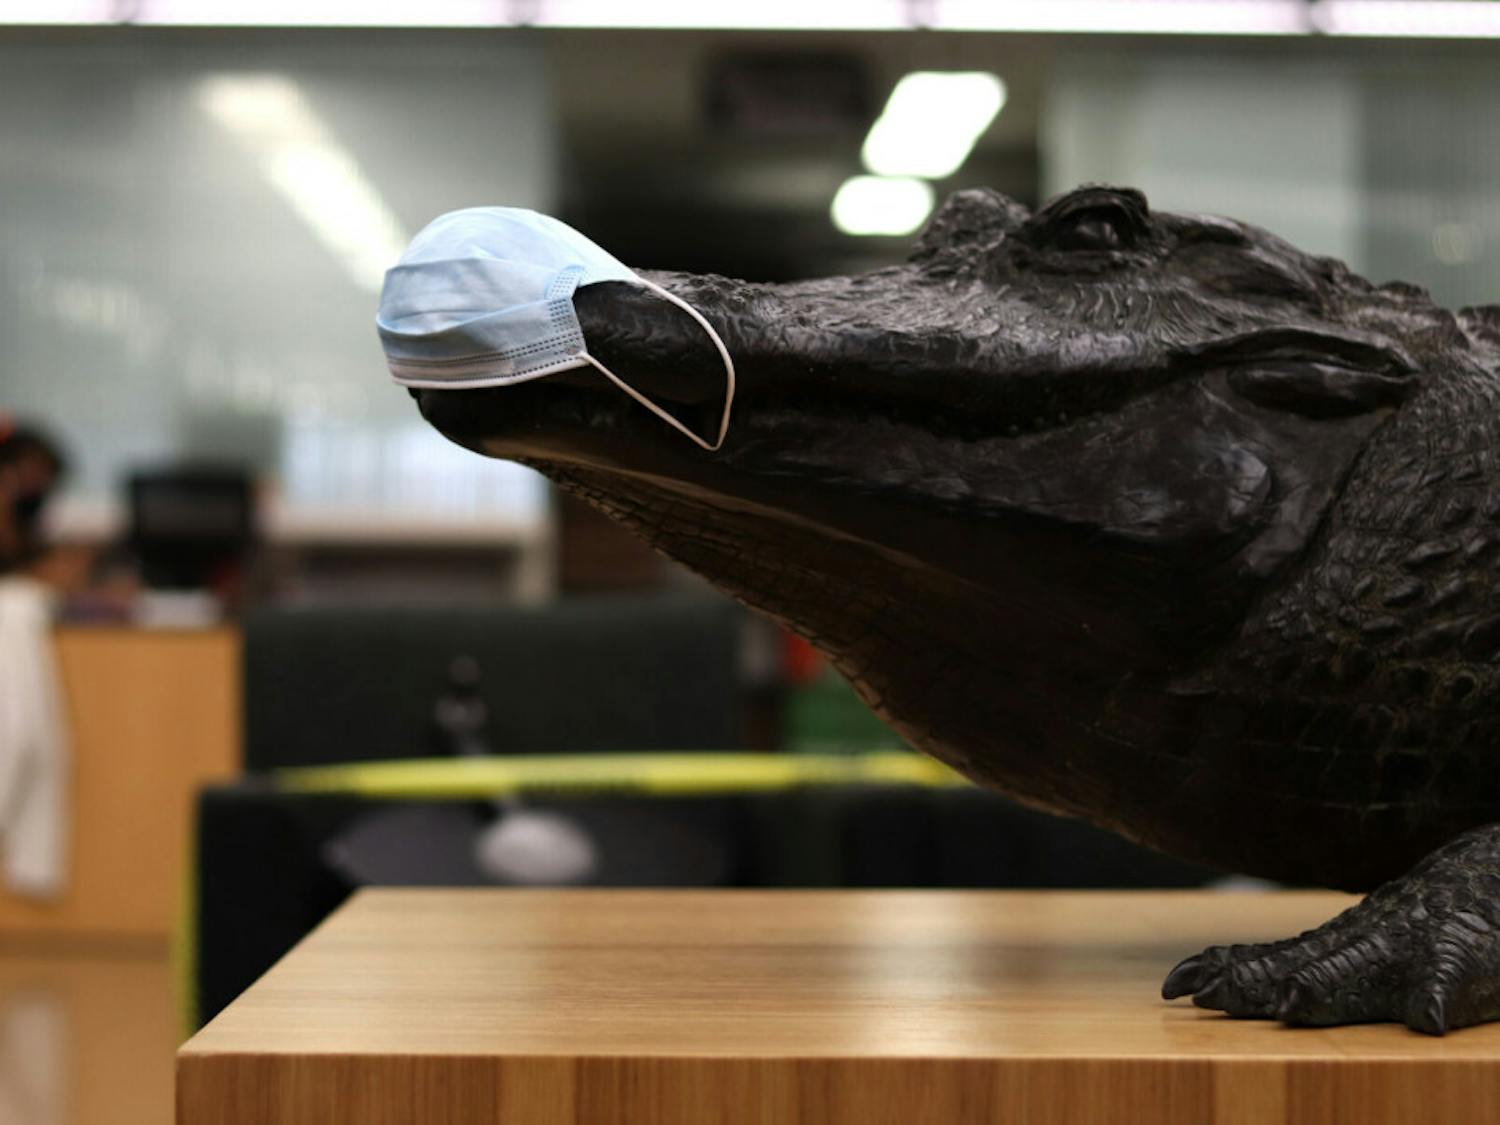 A mask is seen on the "Focused Attention" gator statue in Library West on Friday, Sept. 11, 2020. (Lauren Witte/Alligator Staff)